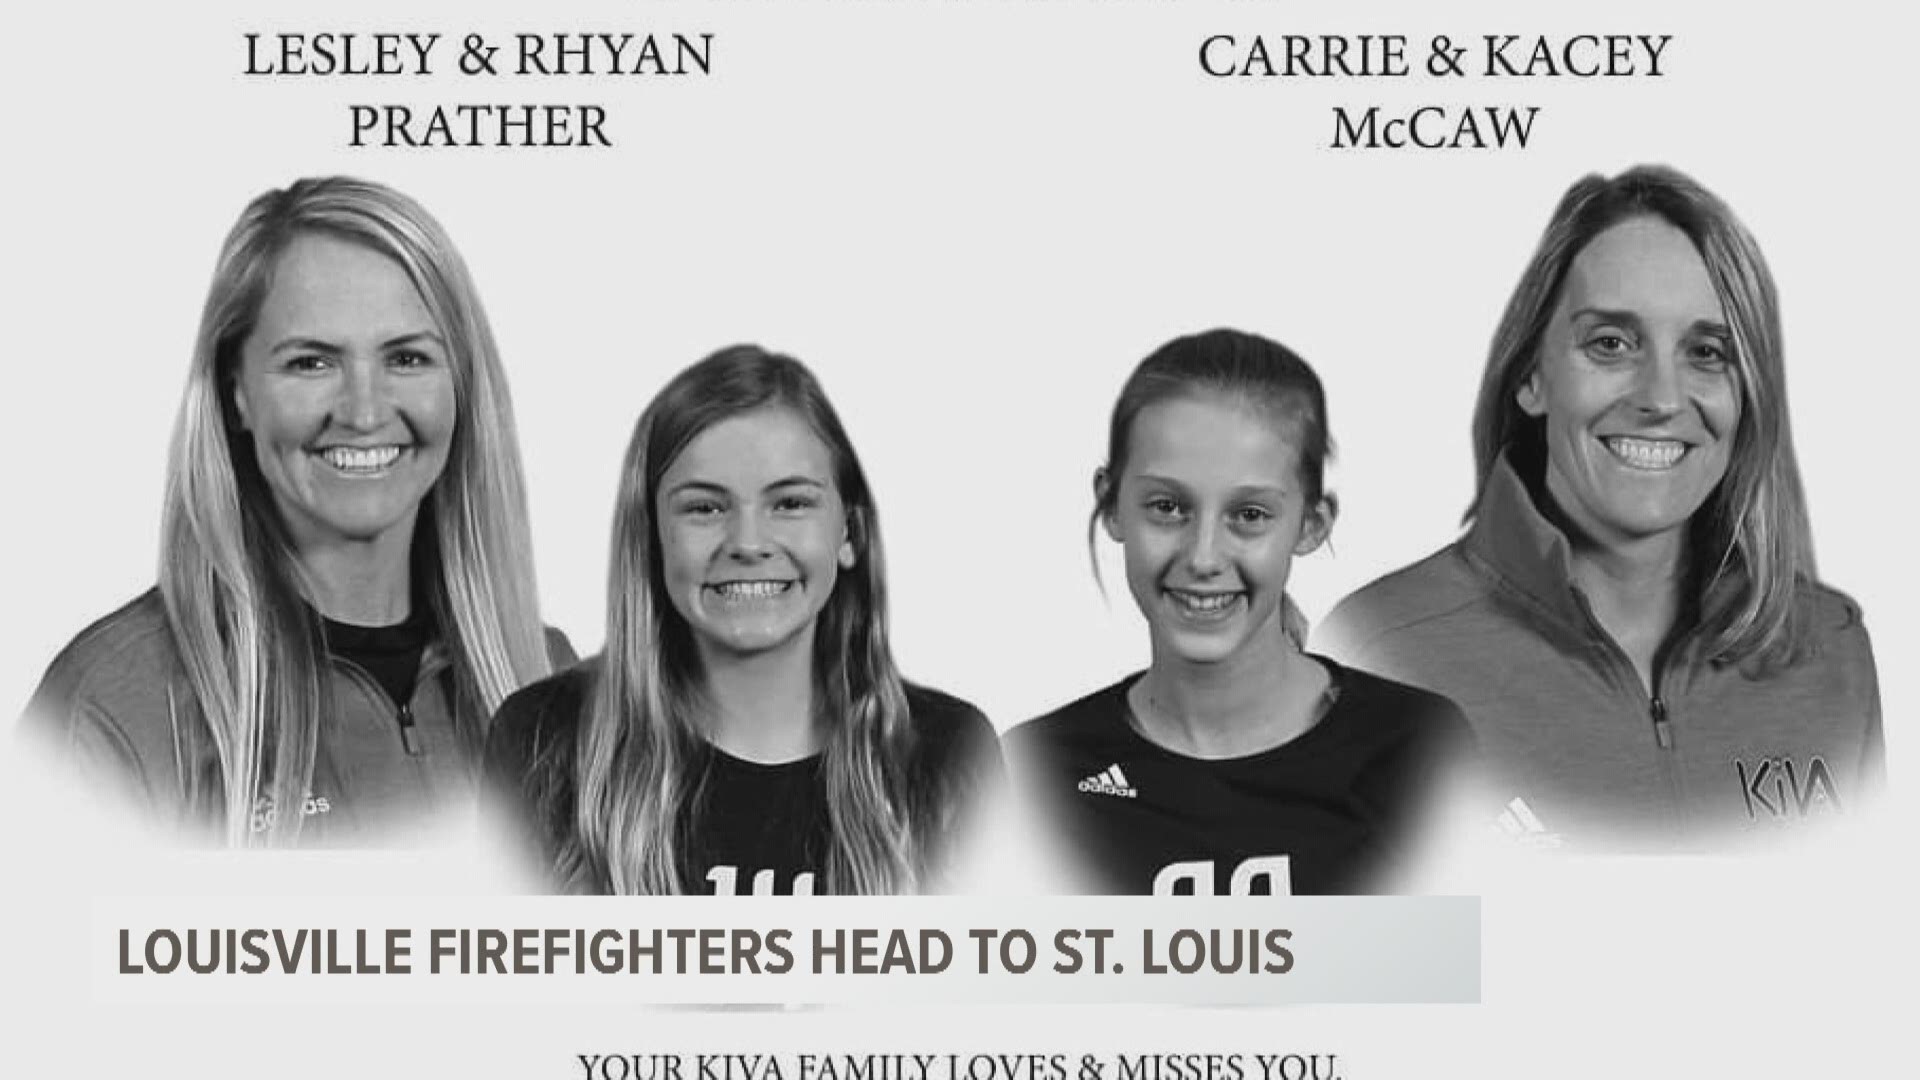 As funeral arrangements are being made, Louisville firefighters are headed to St. Louis to honor their fallen sister.